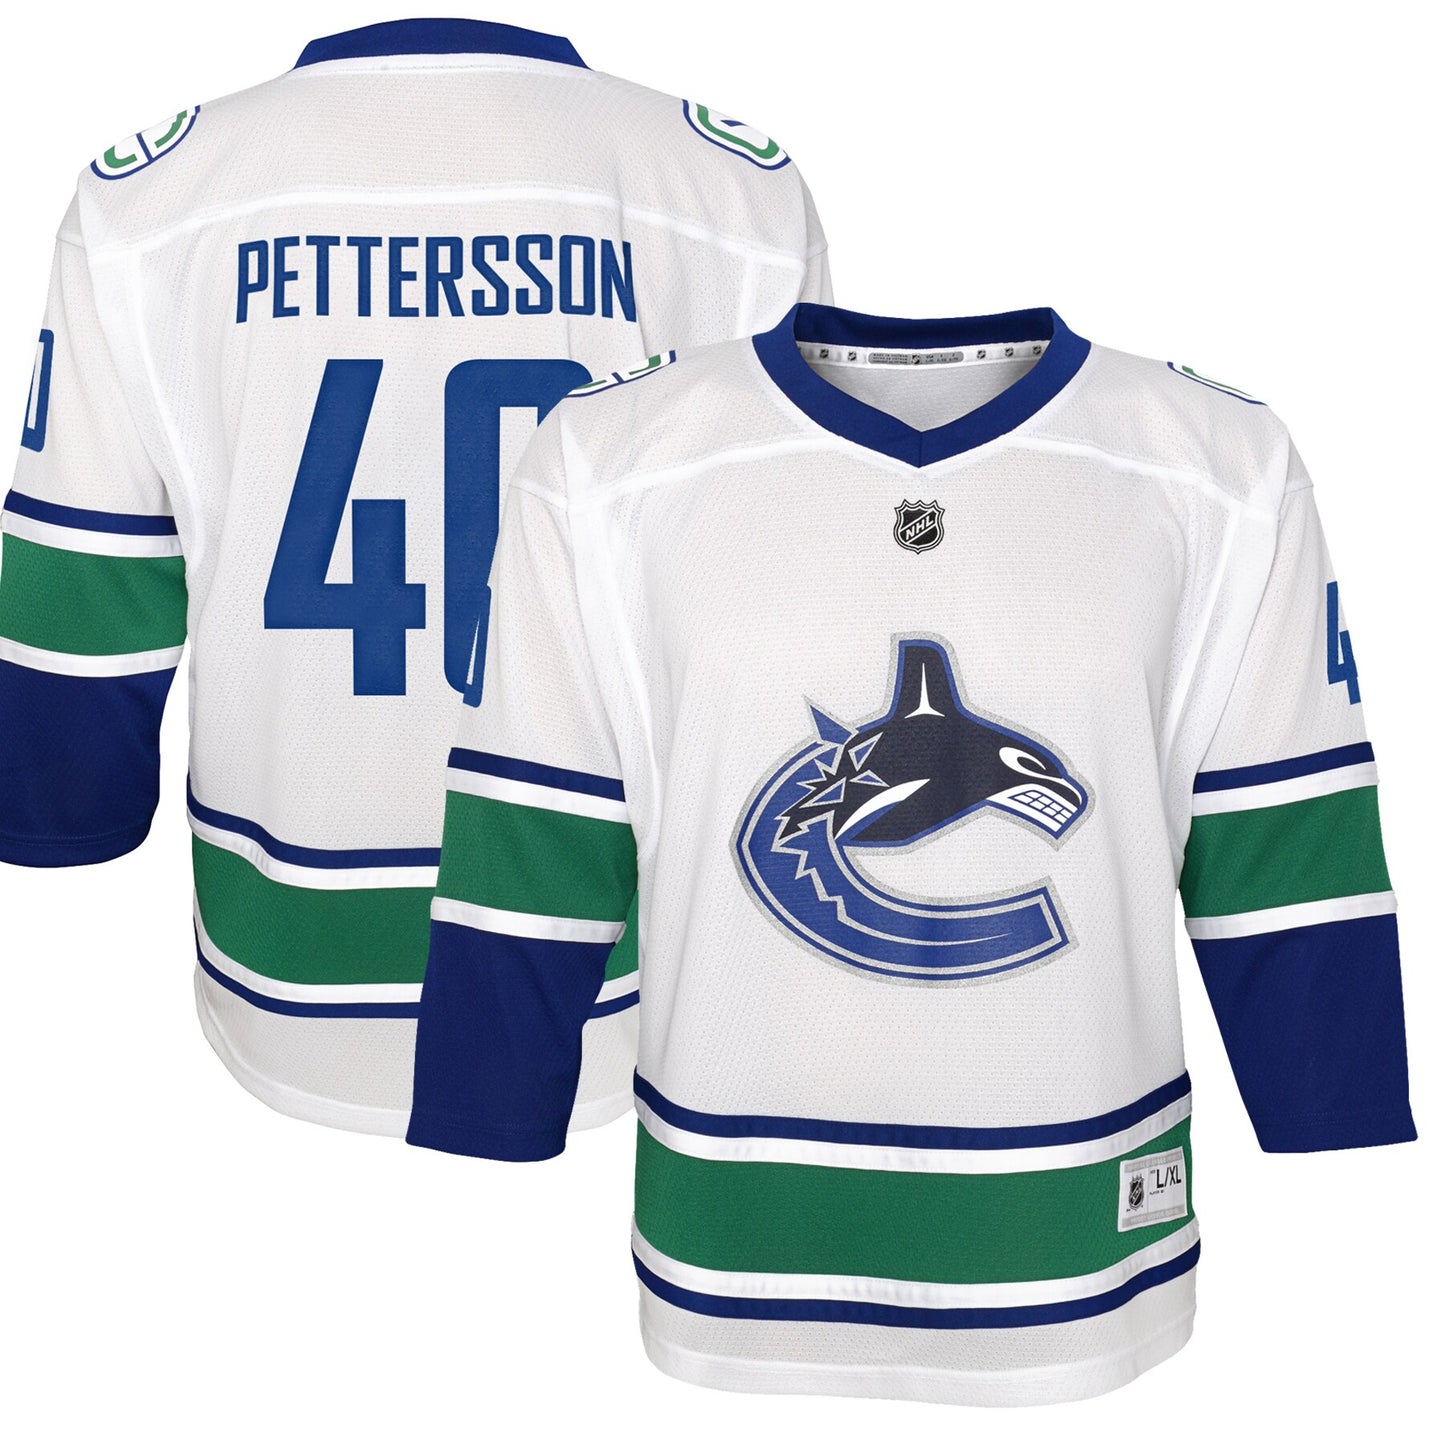 Elias Pettersson Vancouver Canucks Youth 2019/20 Away Replica Player Jersey - White